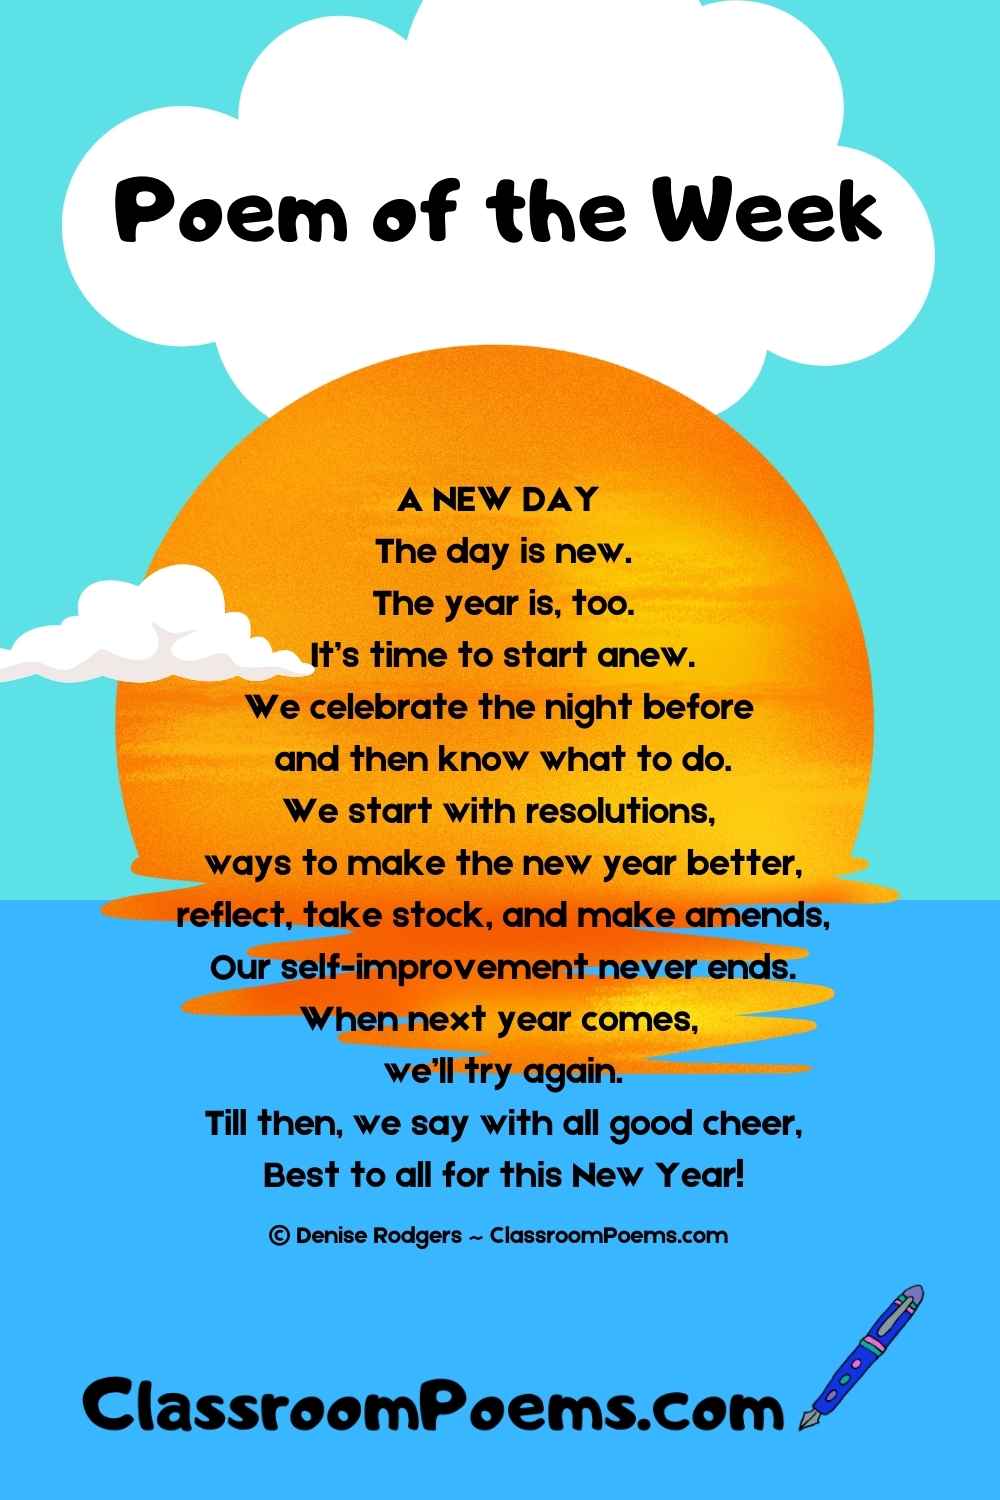 A NEW DAY, a New Year poem for kids by Denise Rodgers on ClassroomPoems.com.